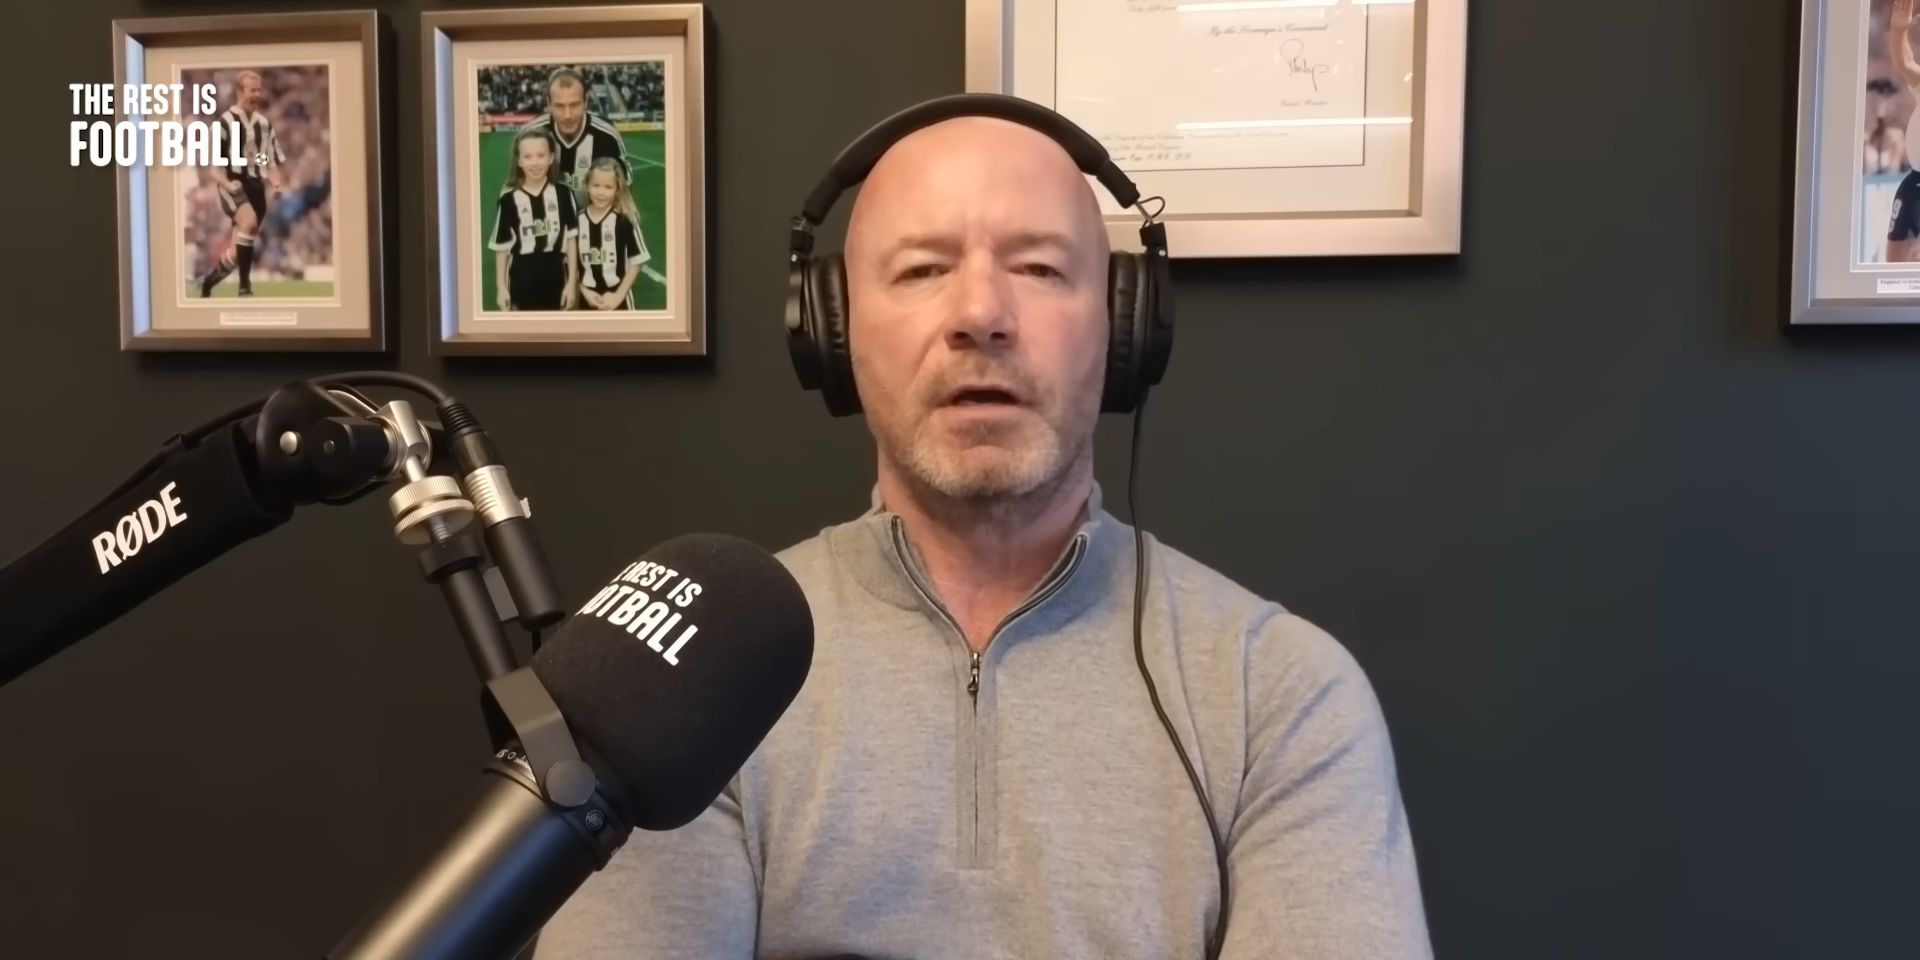 (Video) Shearer praises Liverpool’s ‘top player’ who is ‘a real talent’